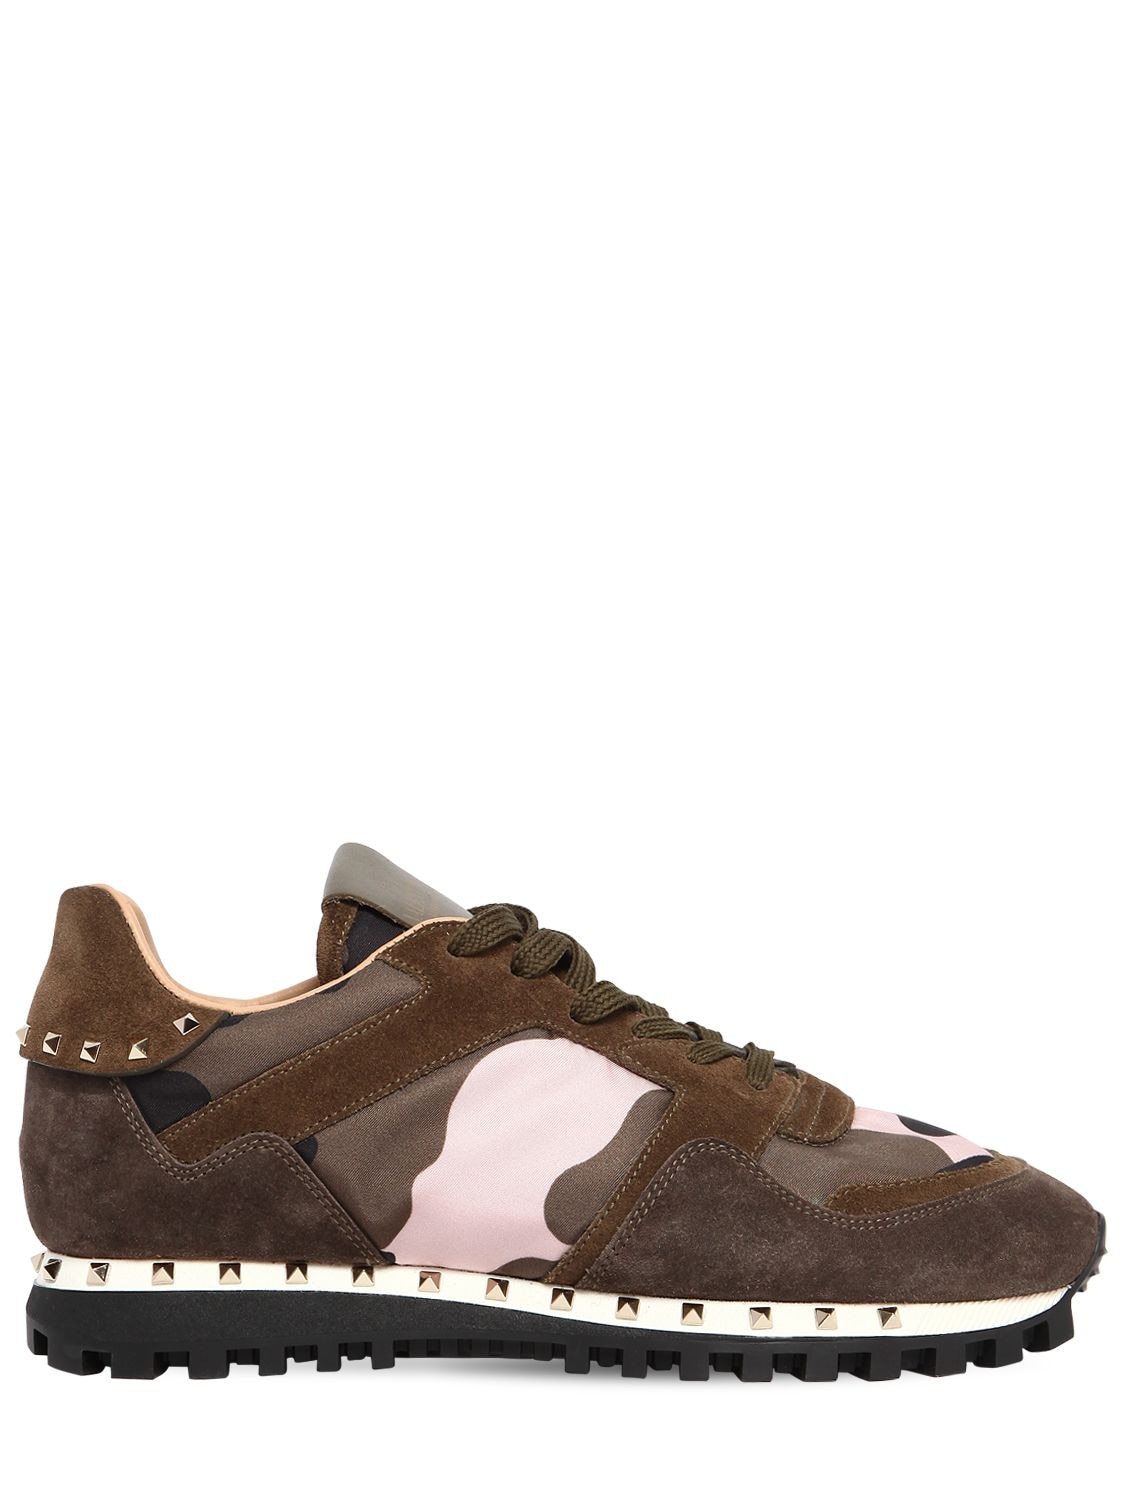 Valentino Garavani Studded Sole Camouflage & Suede Sneakers In Green,pink